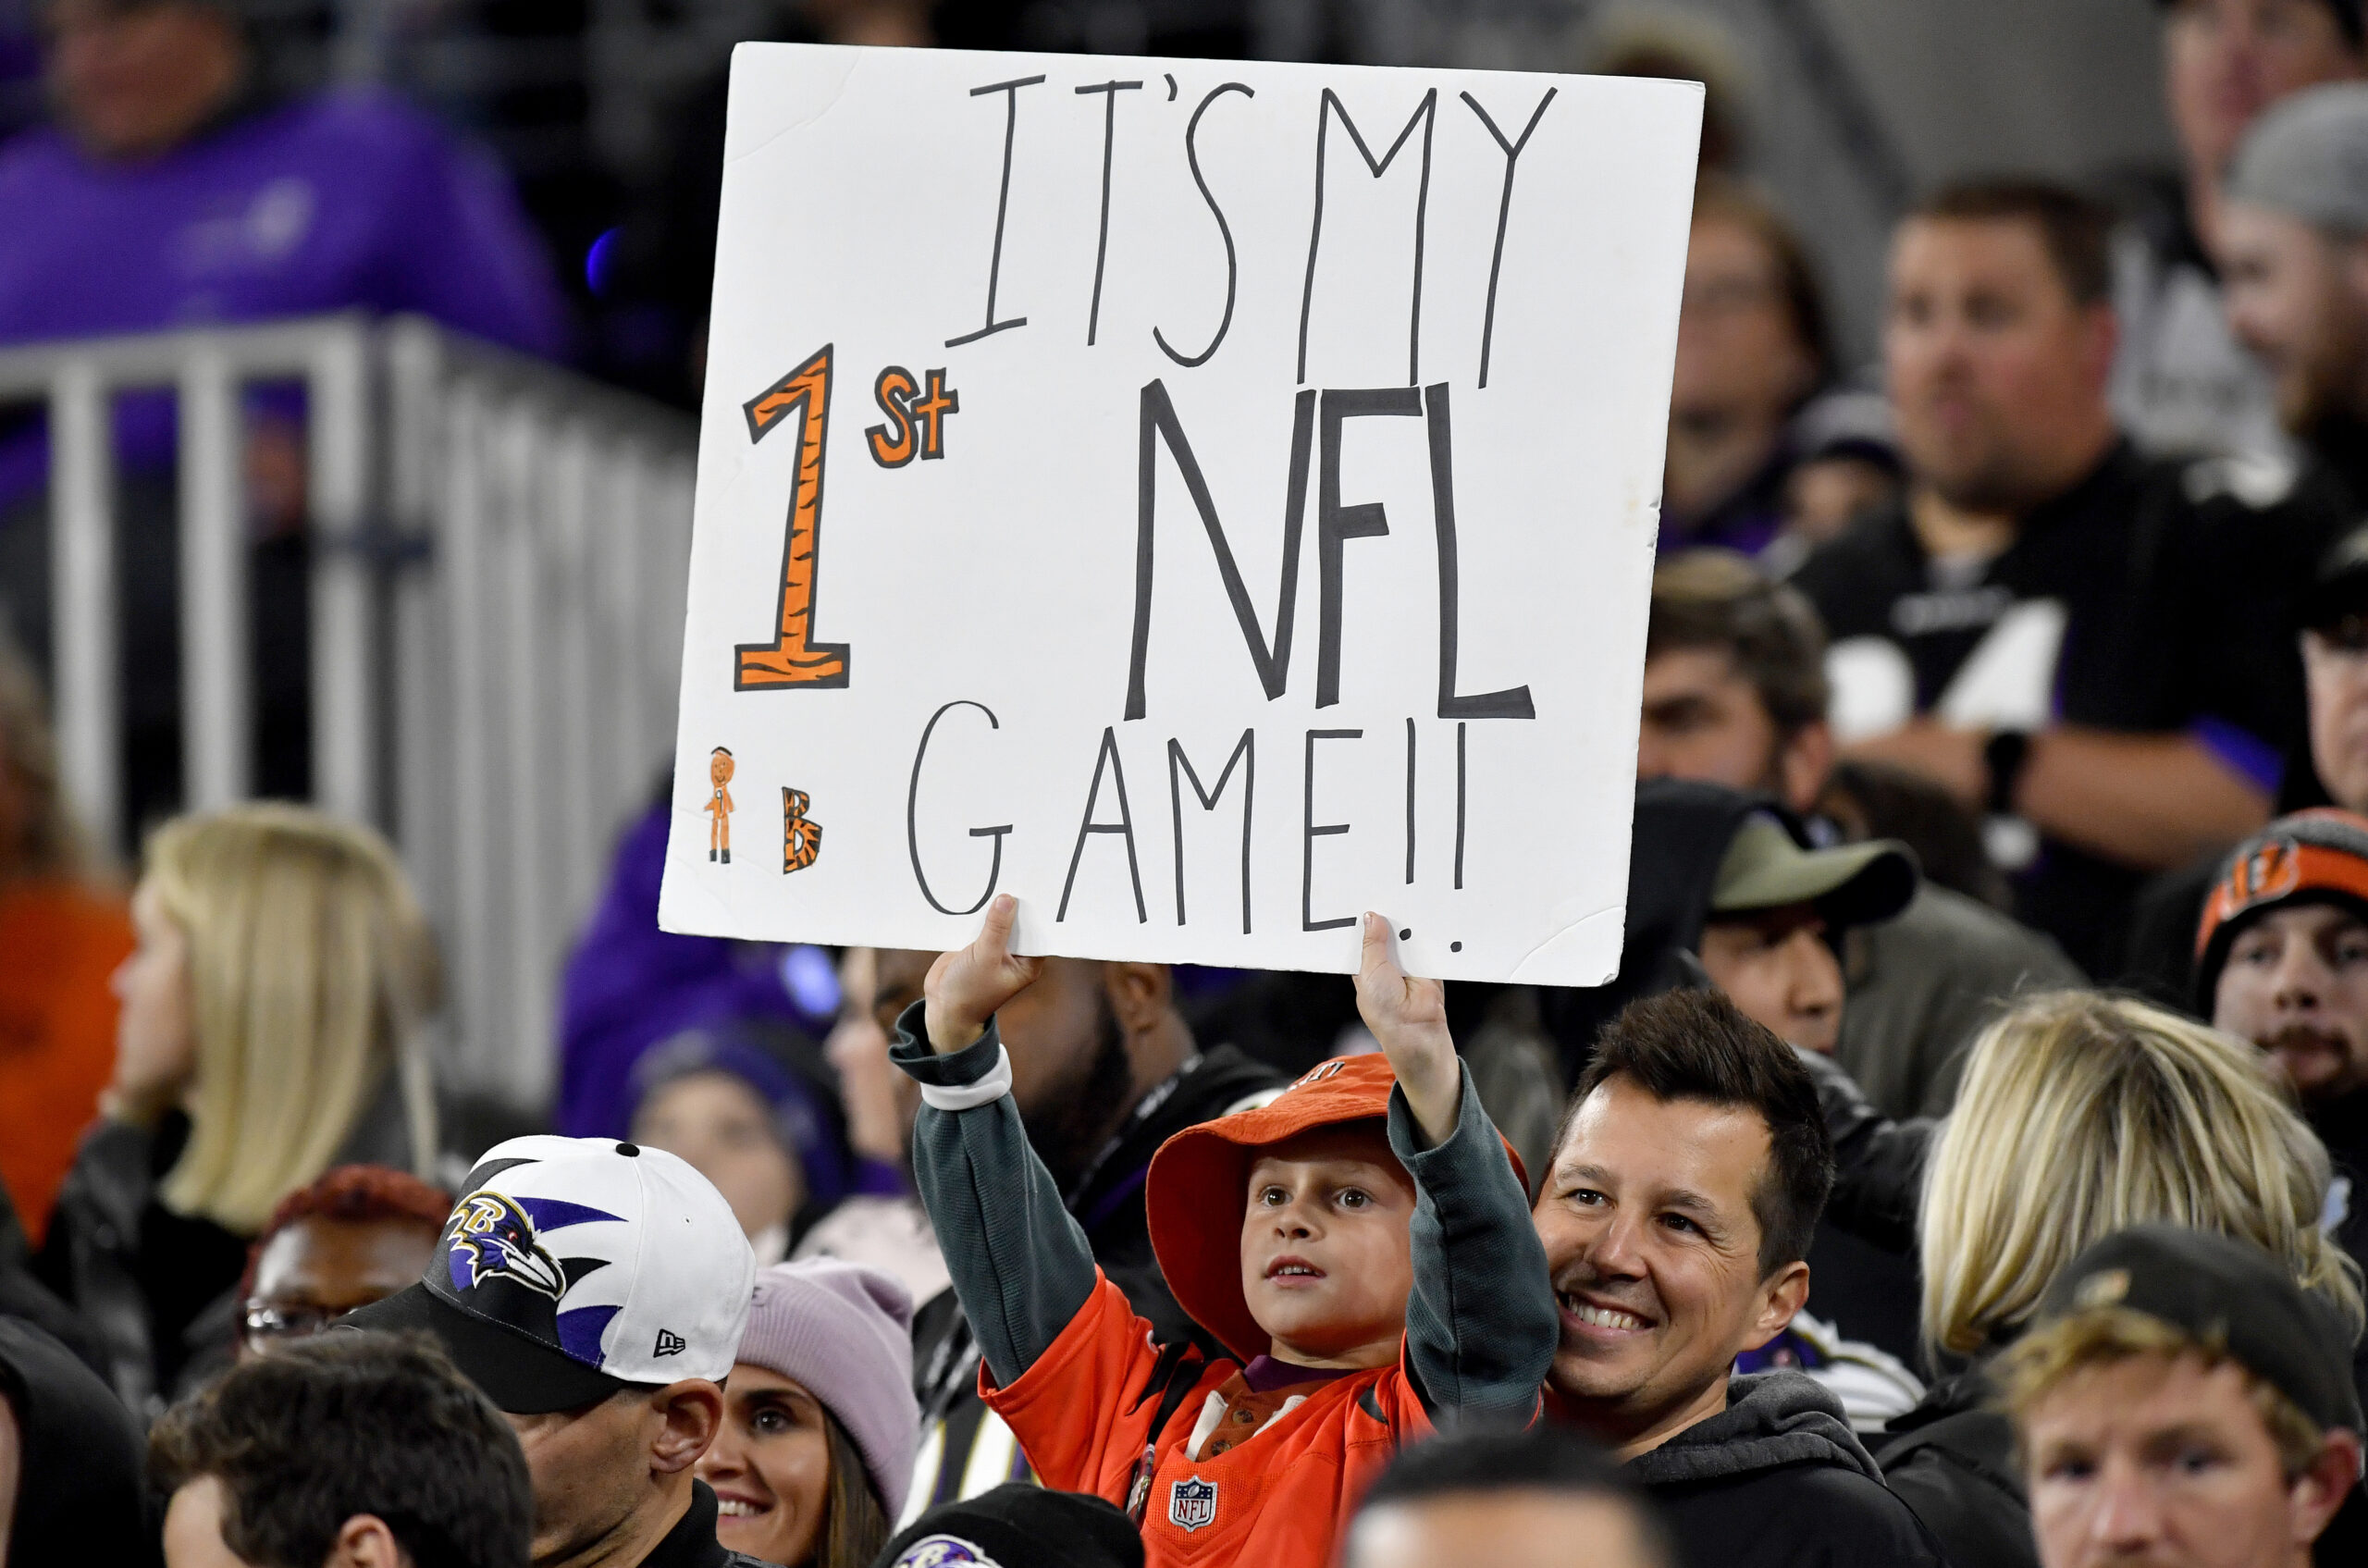 BALTIMORE, MD - OCTOBER 09: A young boy / child / fan holds up a sign that reads Its My First NFL Game!! during the Cincinnati Bengals versus Baltimore Ravens NFL game at M&T Bank Stadium on October 9, 2022 in Baltimore, MD. (Photo by Randy Litzinger/Icon Sportswire via Getty Images)